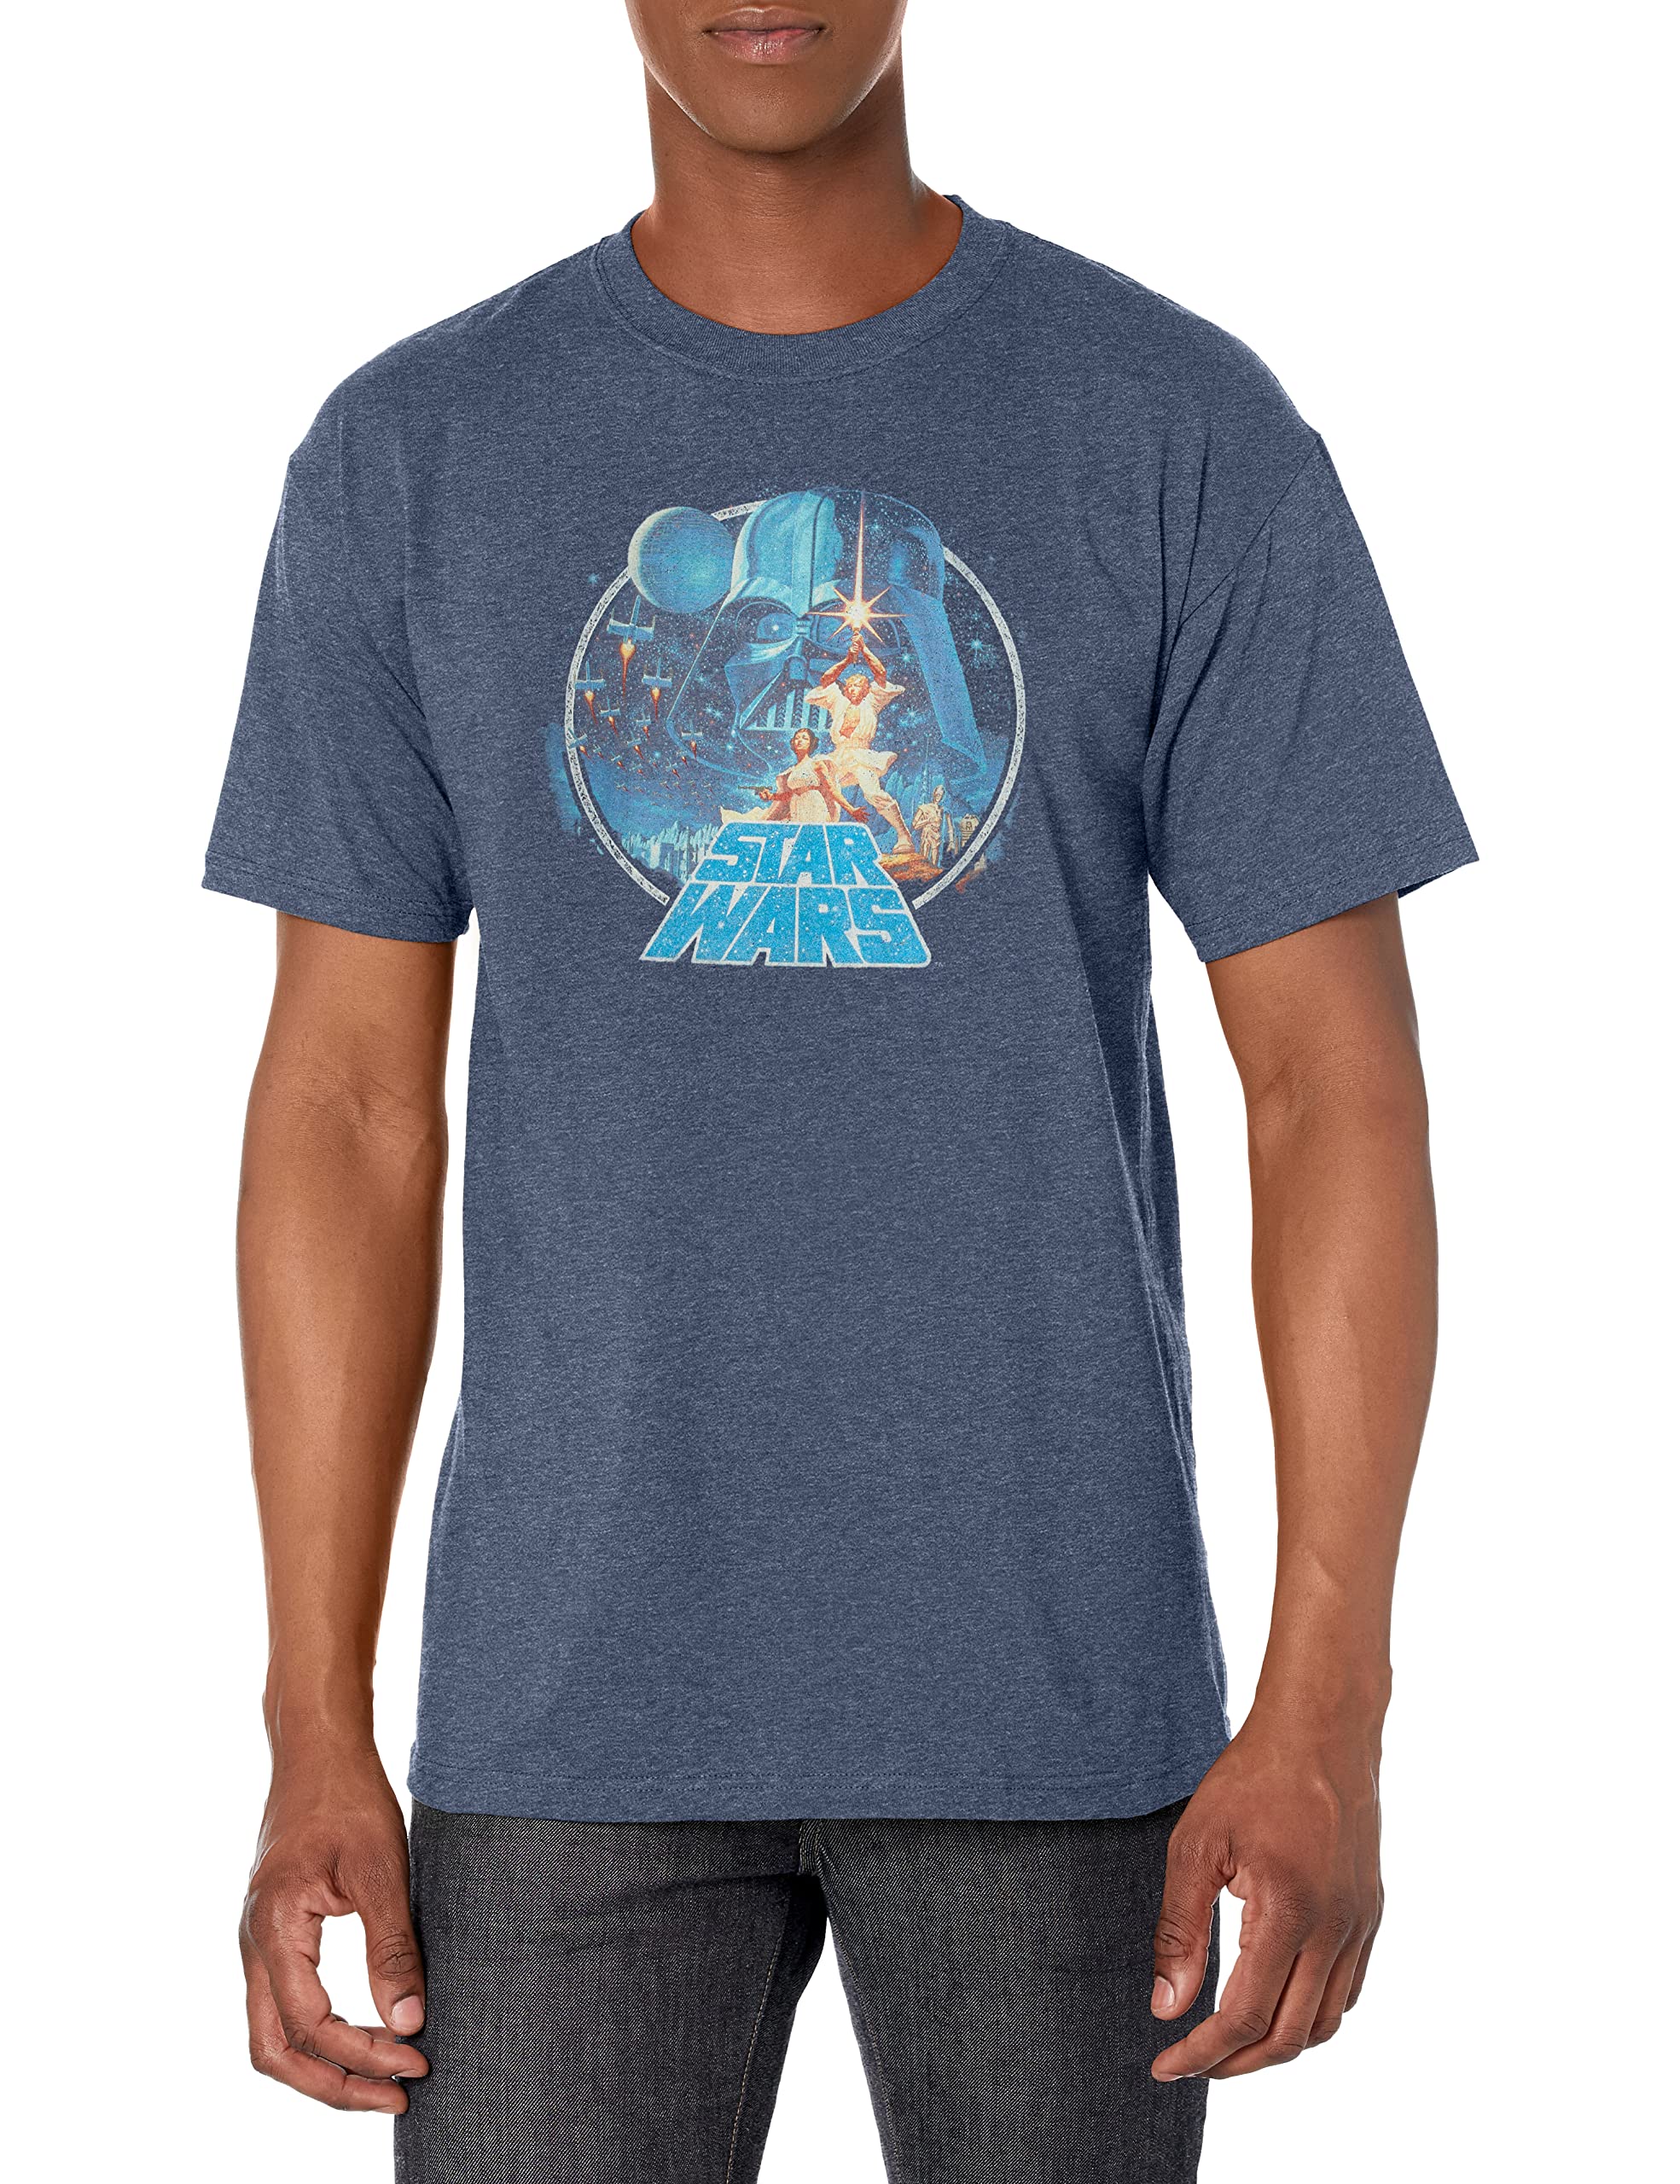 STAR WARS Young Men's Vintage Victory T-Shirt